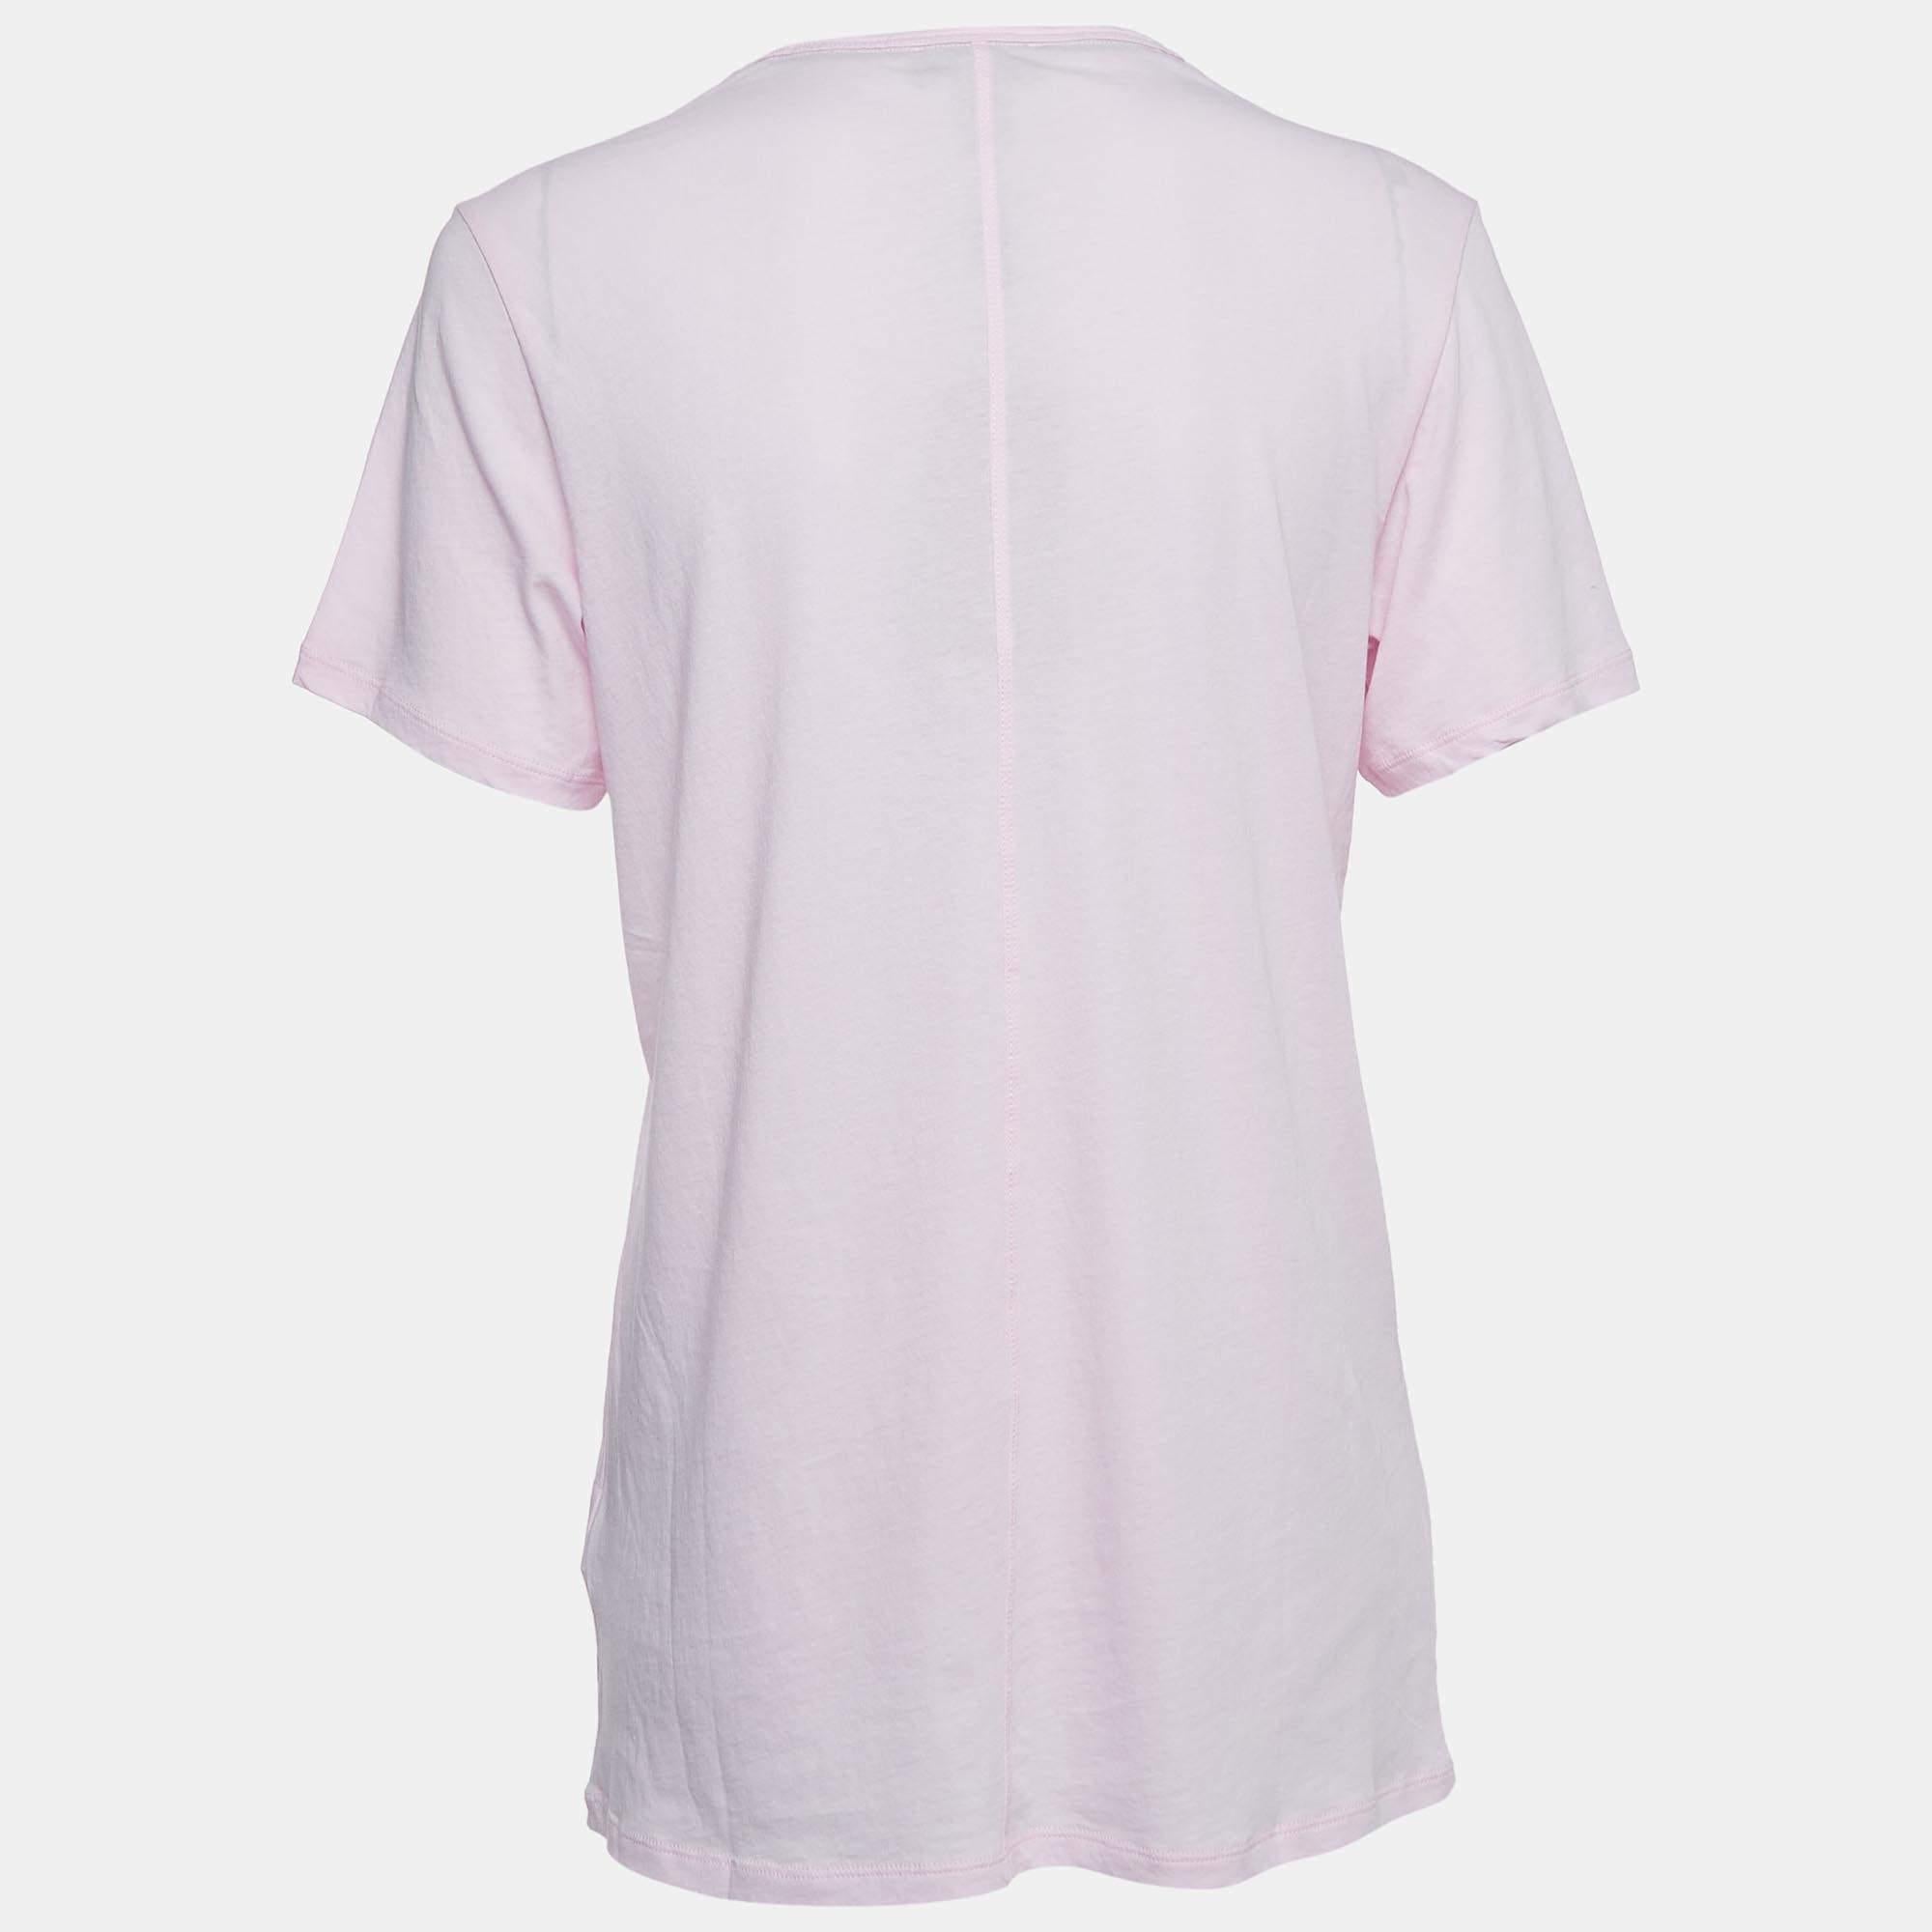 Perfect for casual outings or errands, this Burberry T-shirt is the best piece to feel comfortable and stylish in. It flaunts a catchy shade and a relaxed fit.

